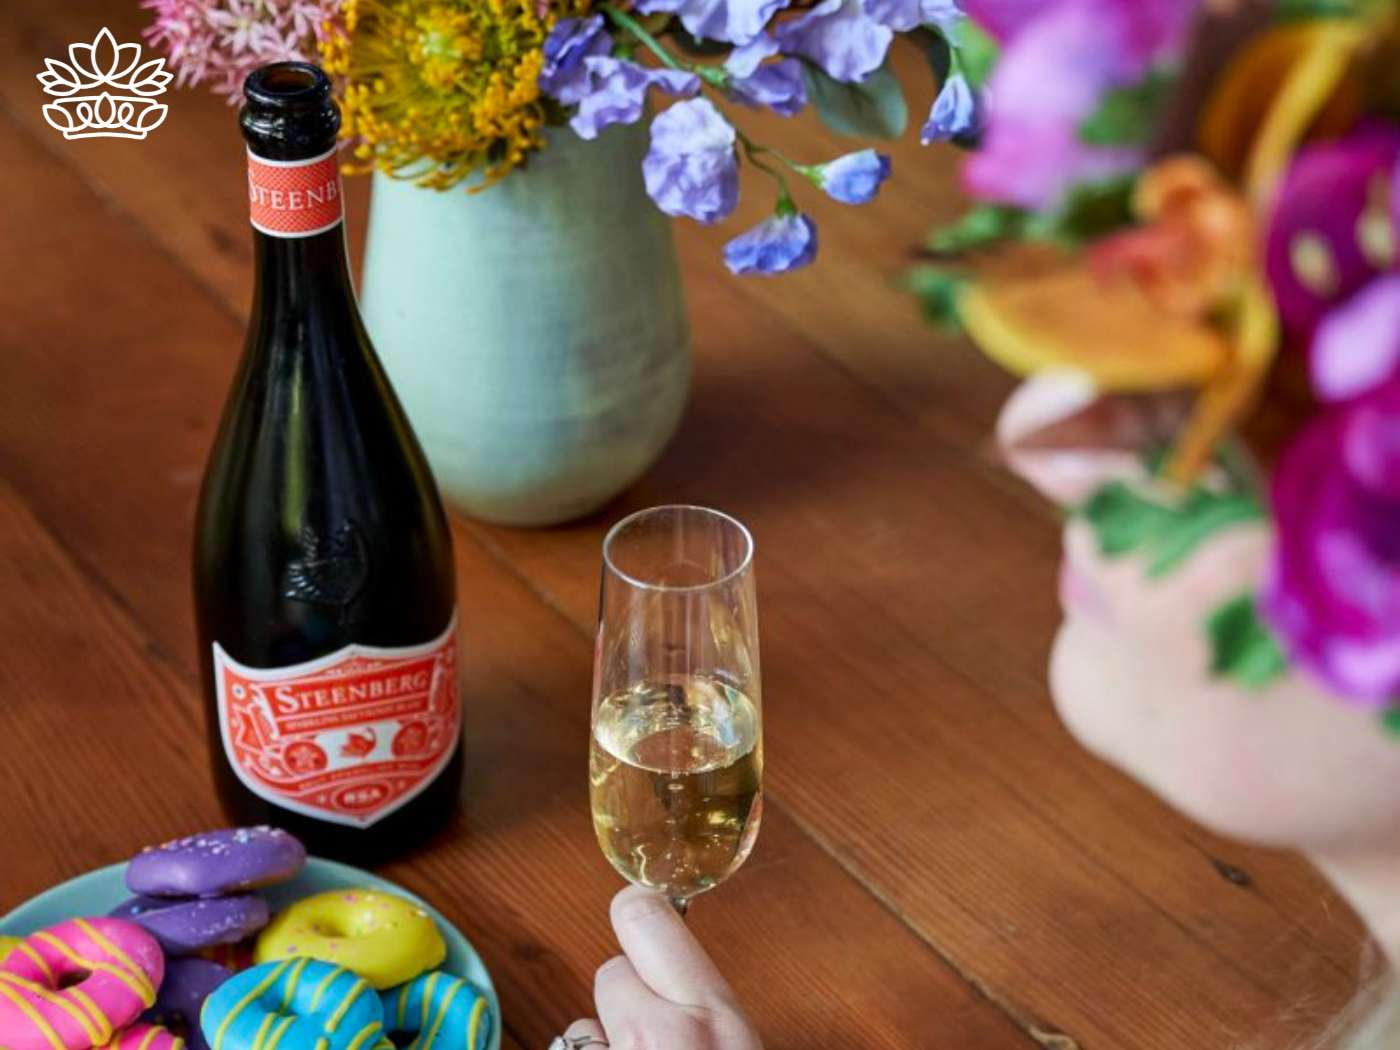 A hand holding a glass of sparkling wine beside a bottle, with vibrant macarons on a plate and a bouquet of fresh flowers in a vase, celebrating with the Congratulations Messages —Fabulous Flowers and Gifts.